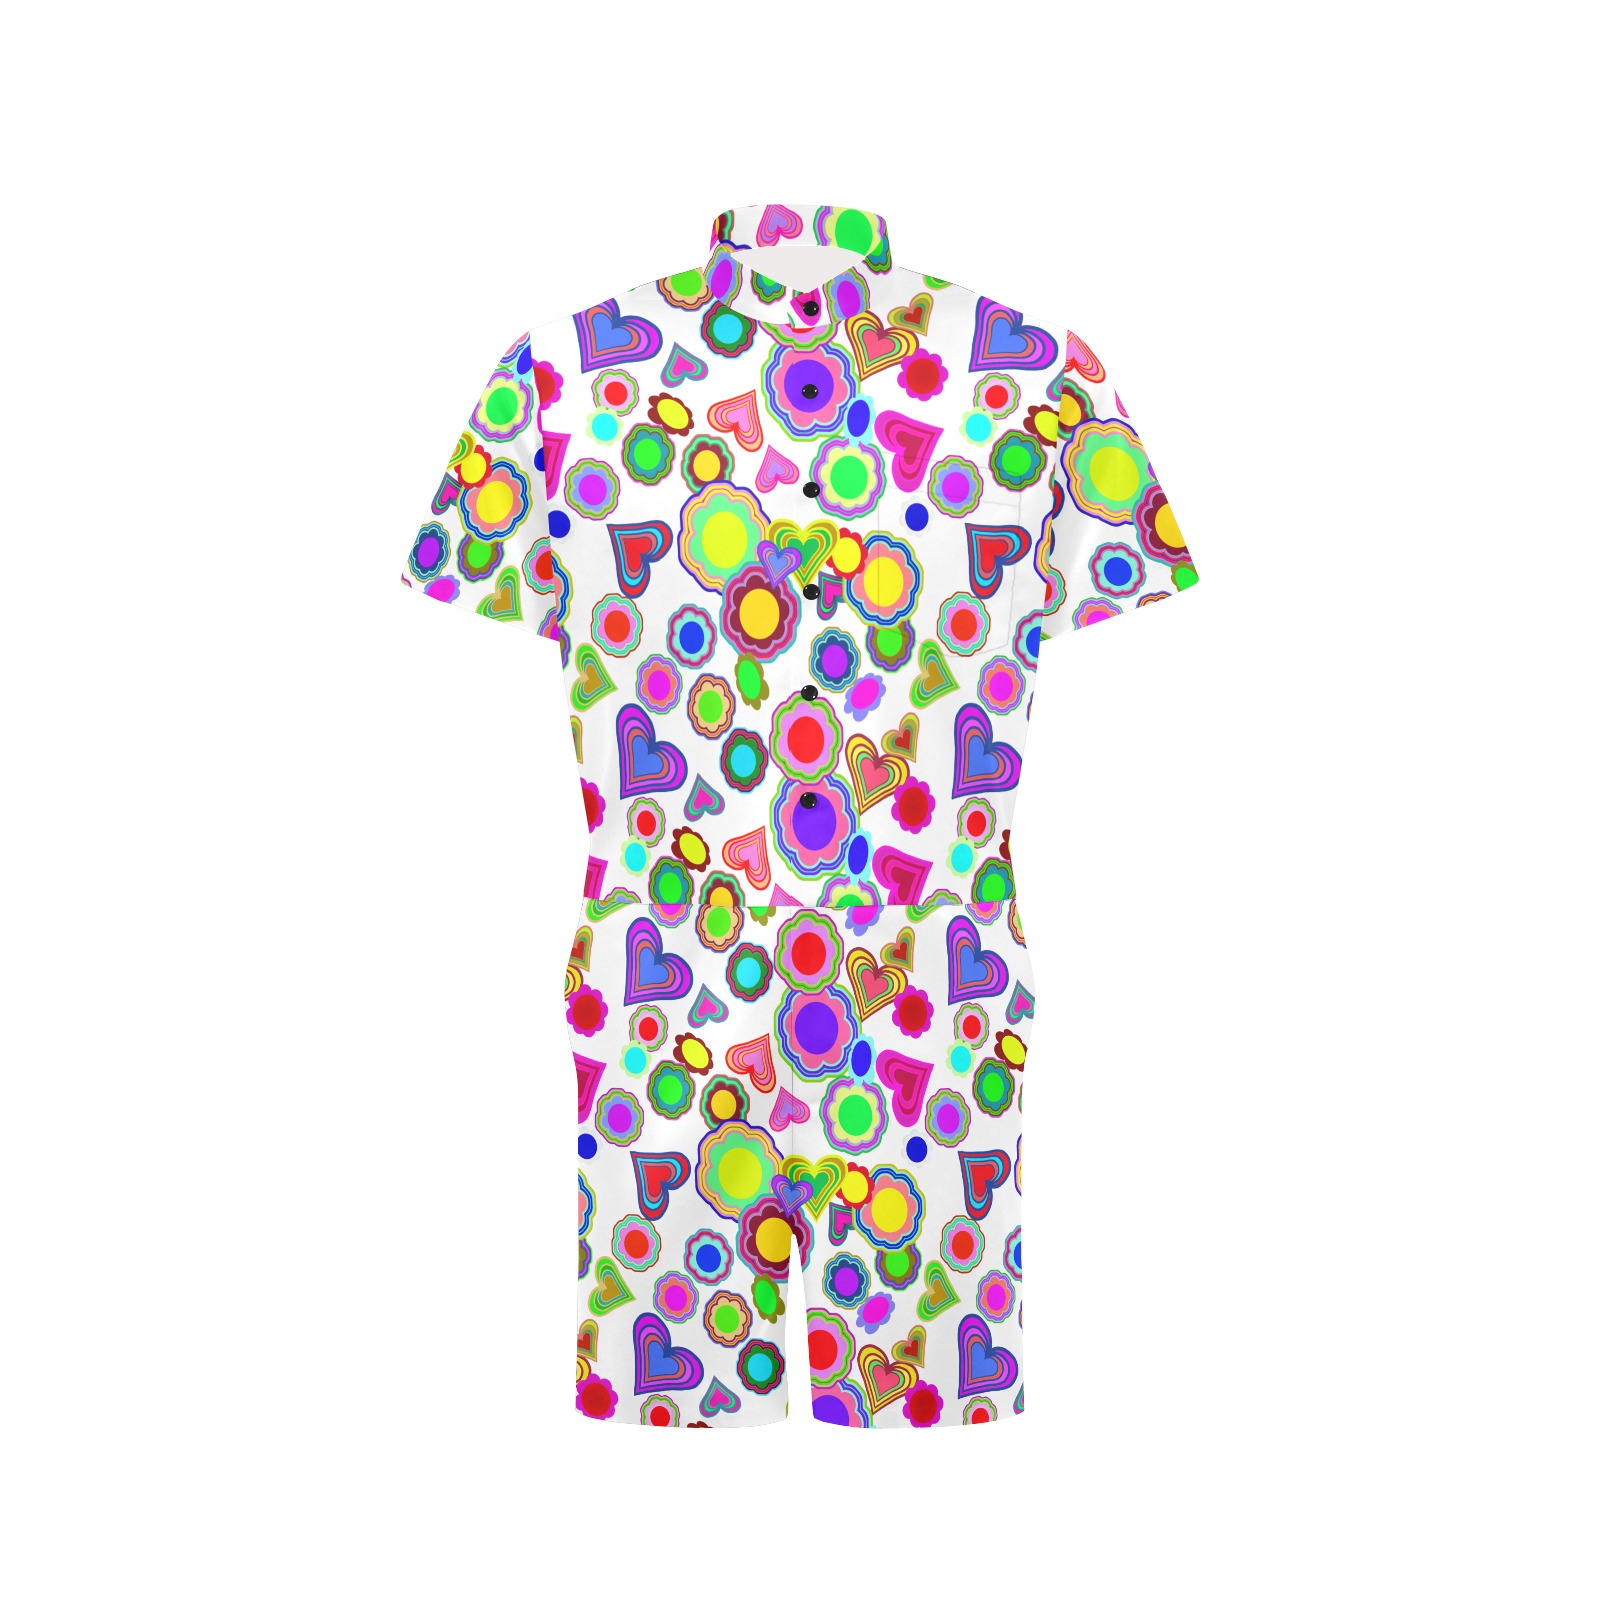 Groovy Hearts and Flowers White Men's Short Sleeve Jumpsuit